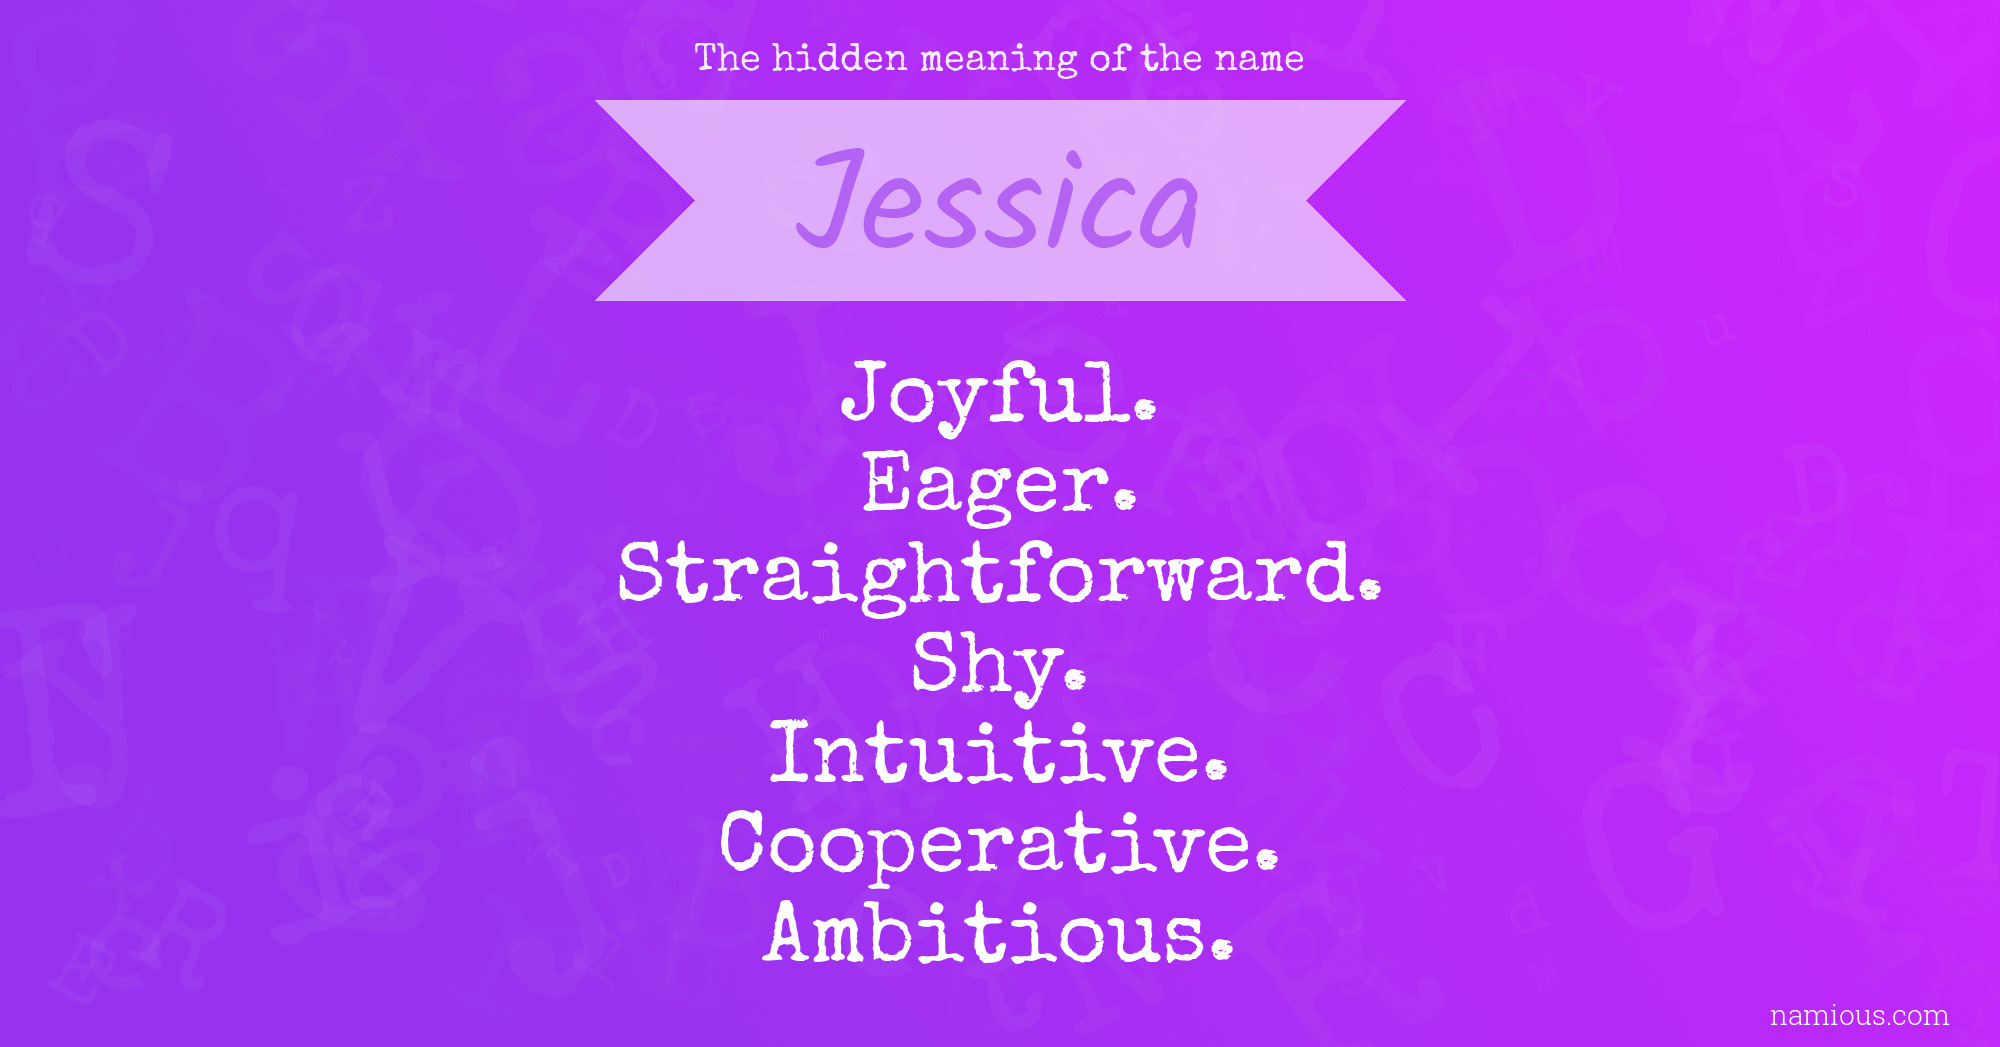 The hidden meaning of the name Jessica